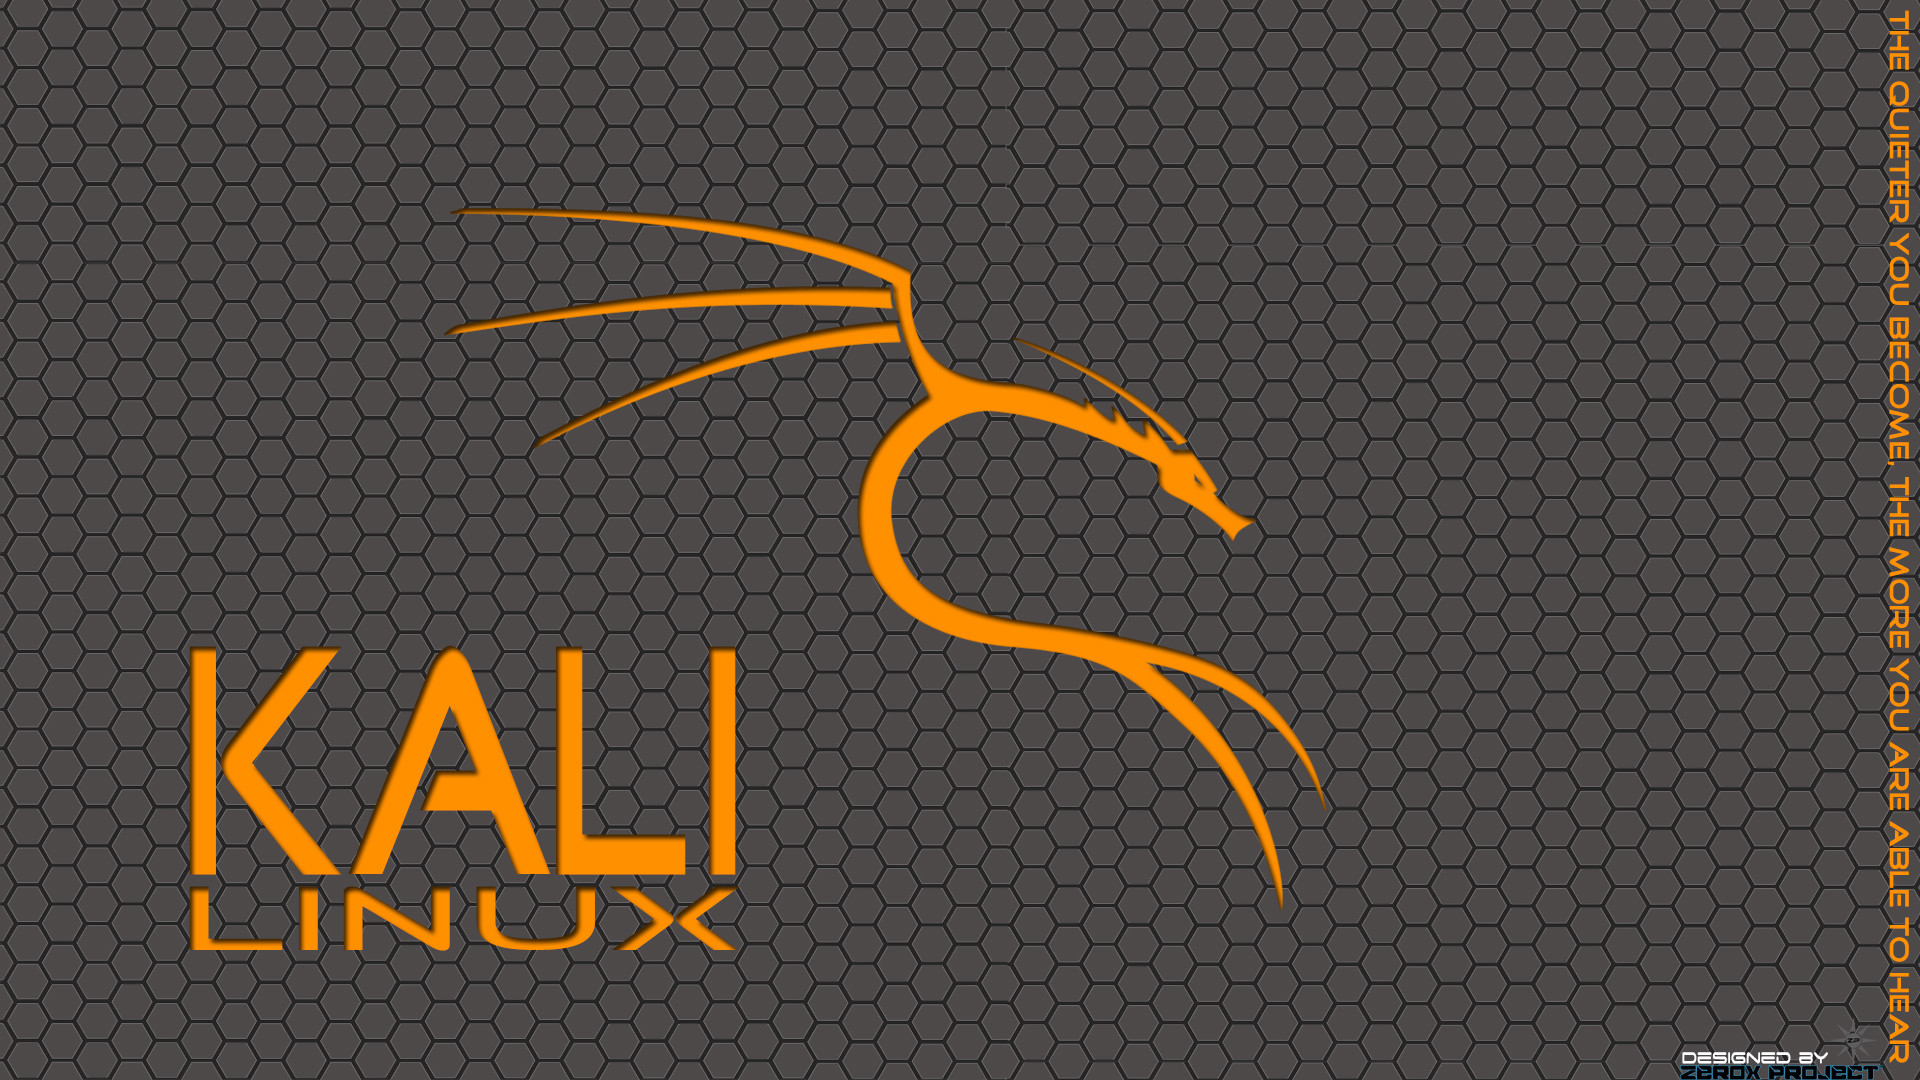 1920x1080 ... Kali Linux BackTrack - The Rebirth v1.3 (Orange) by ZeroxProject